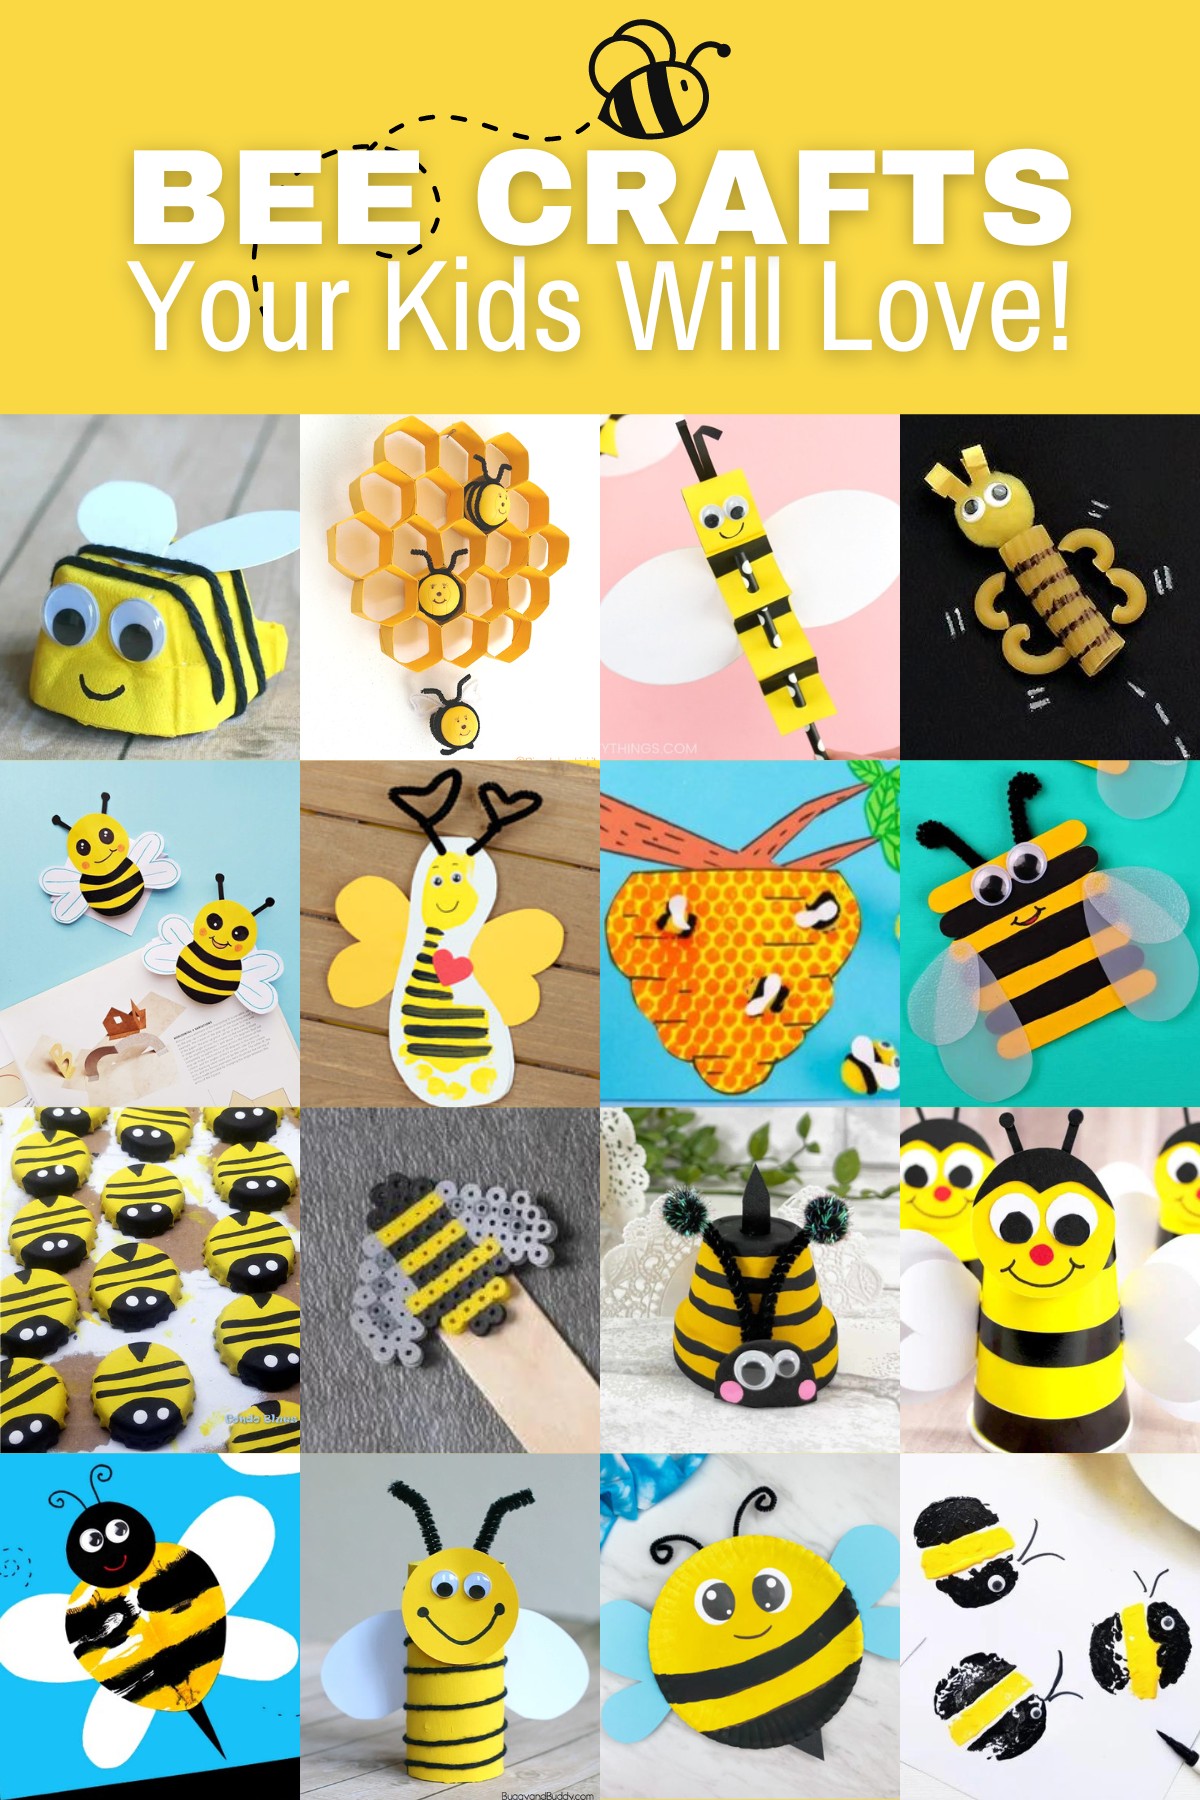 Bee crafts your kids will love